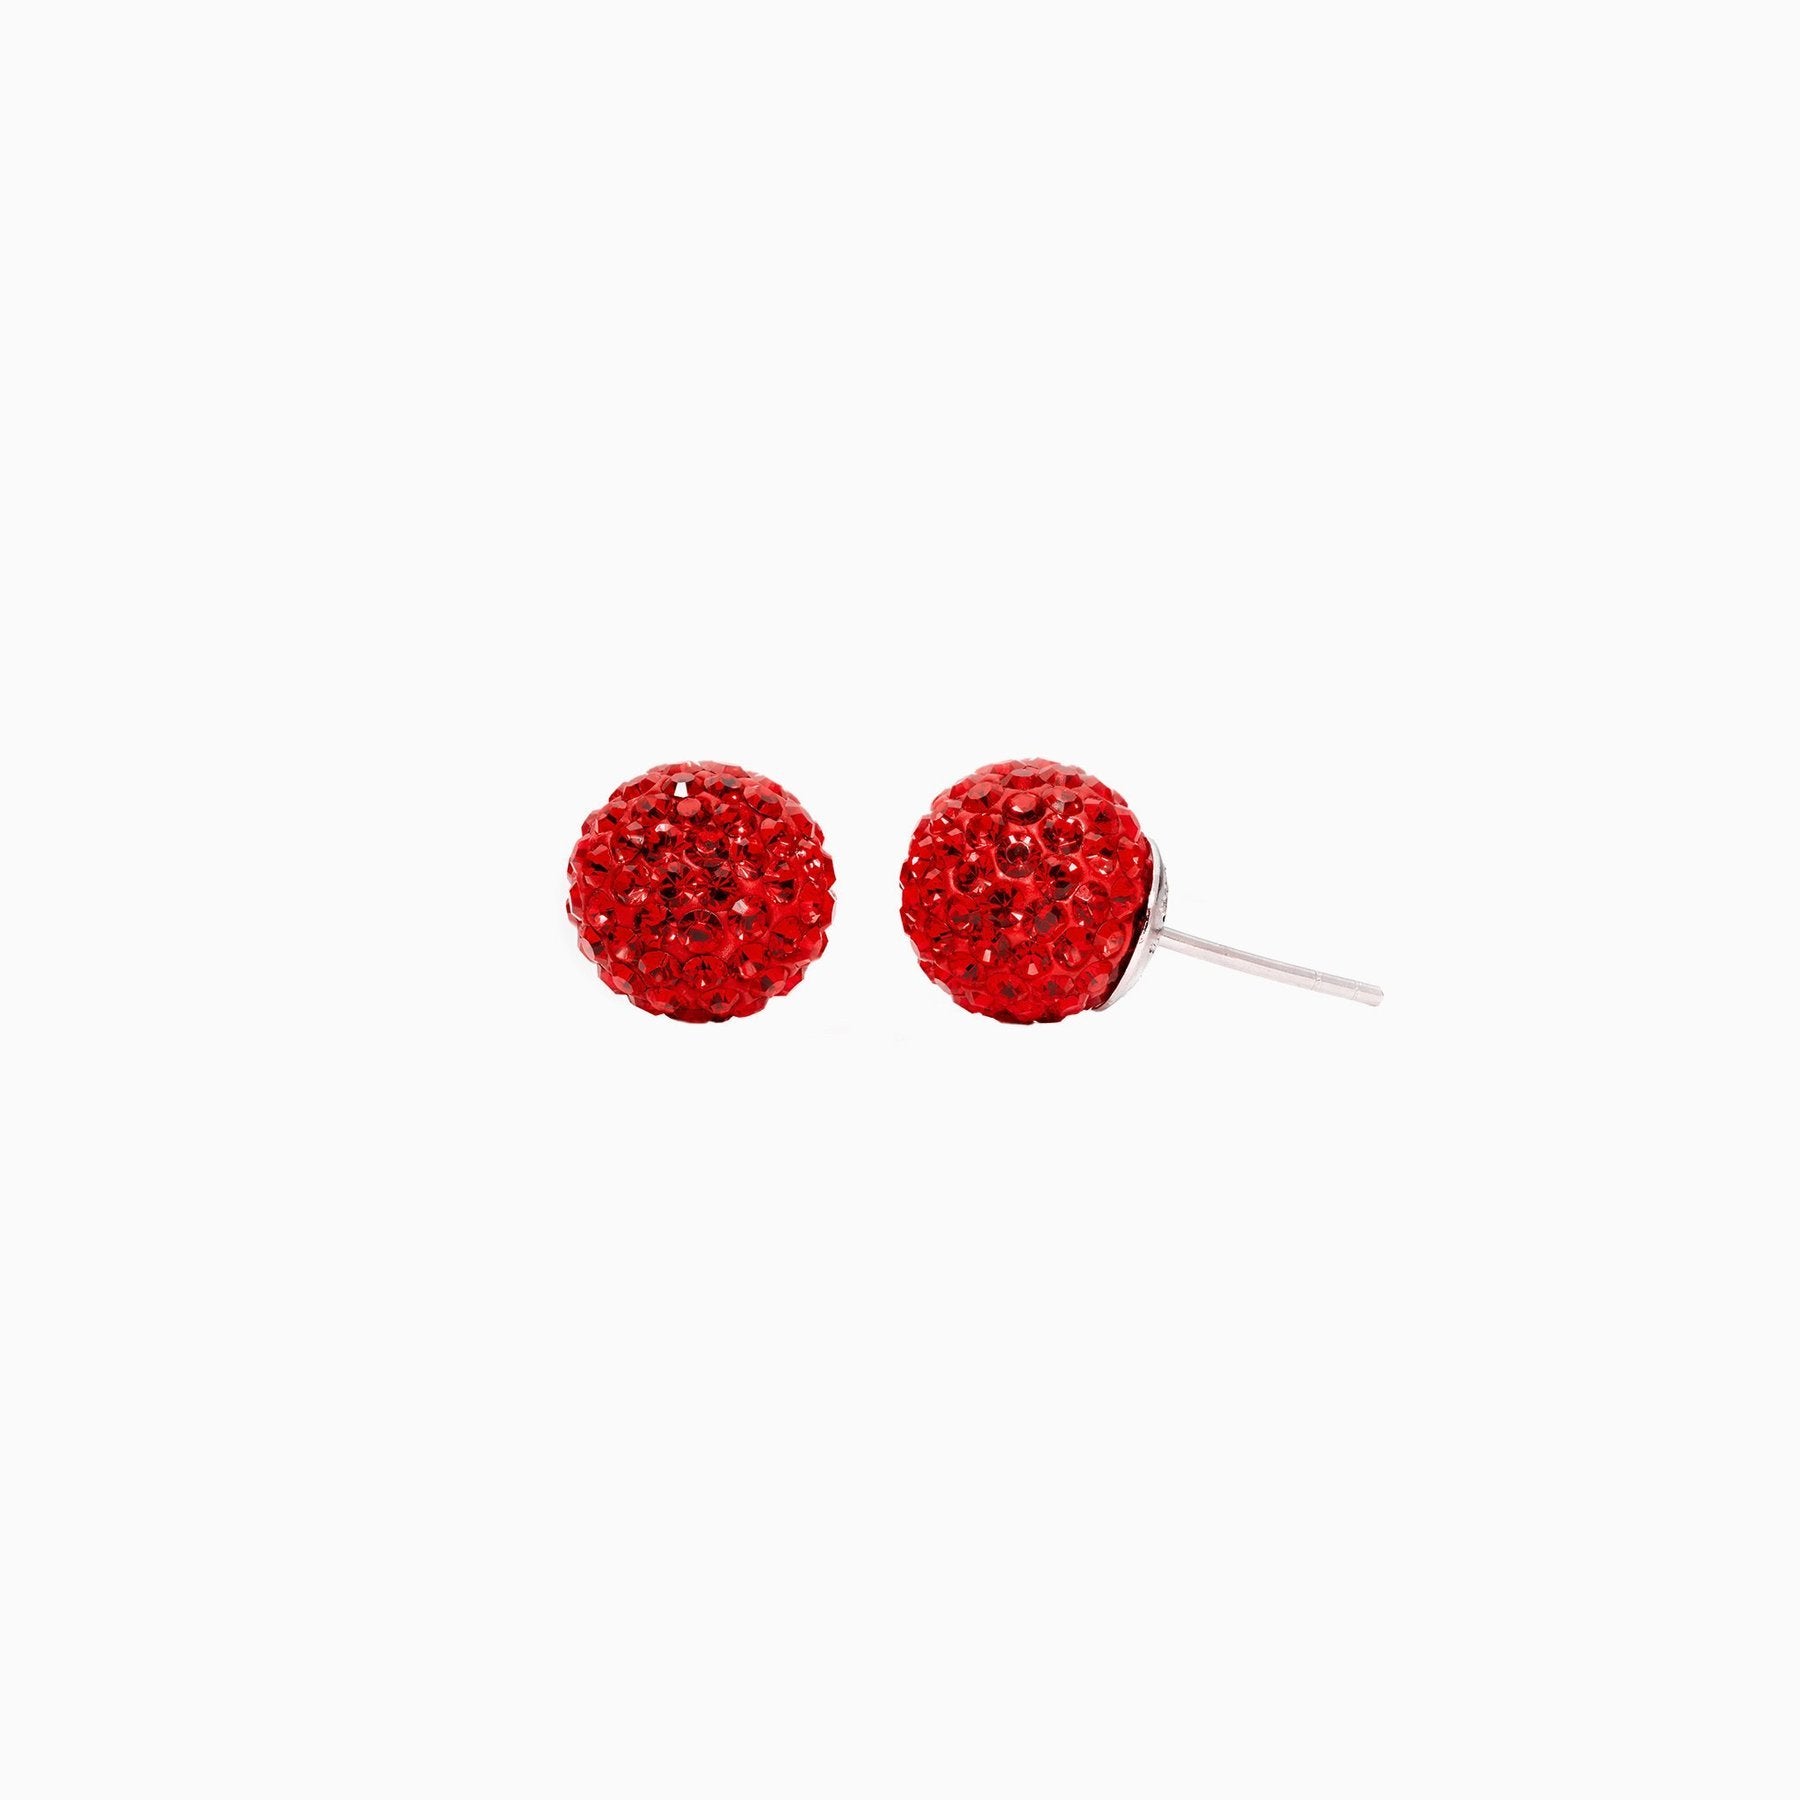 H&B Sparkle Ball™ Stud Earrings - 10mm Red